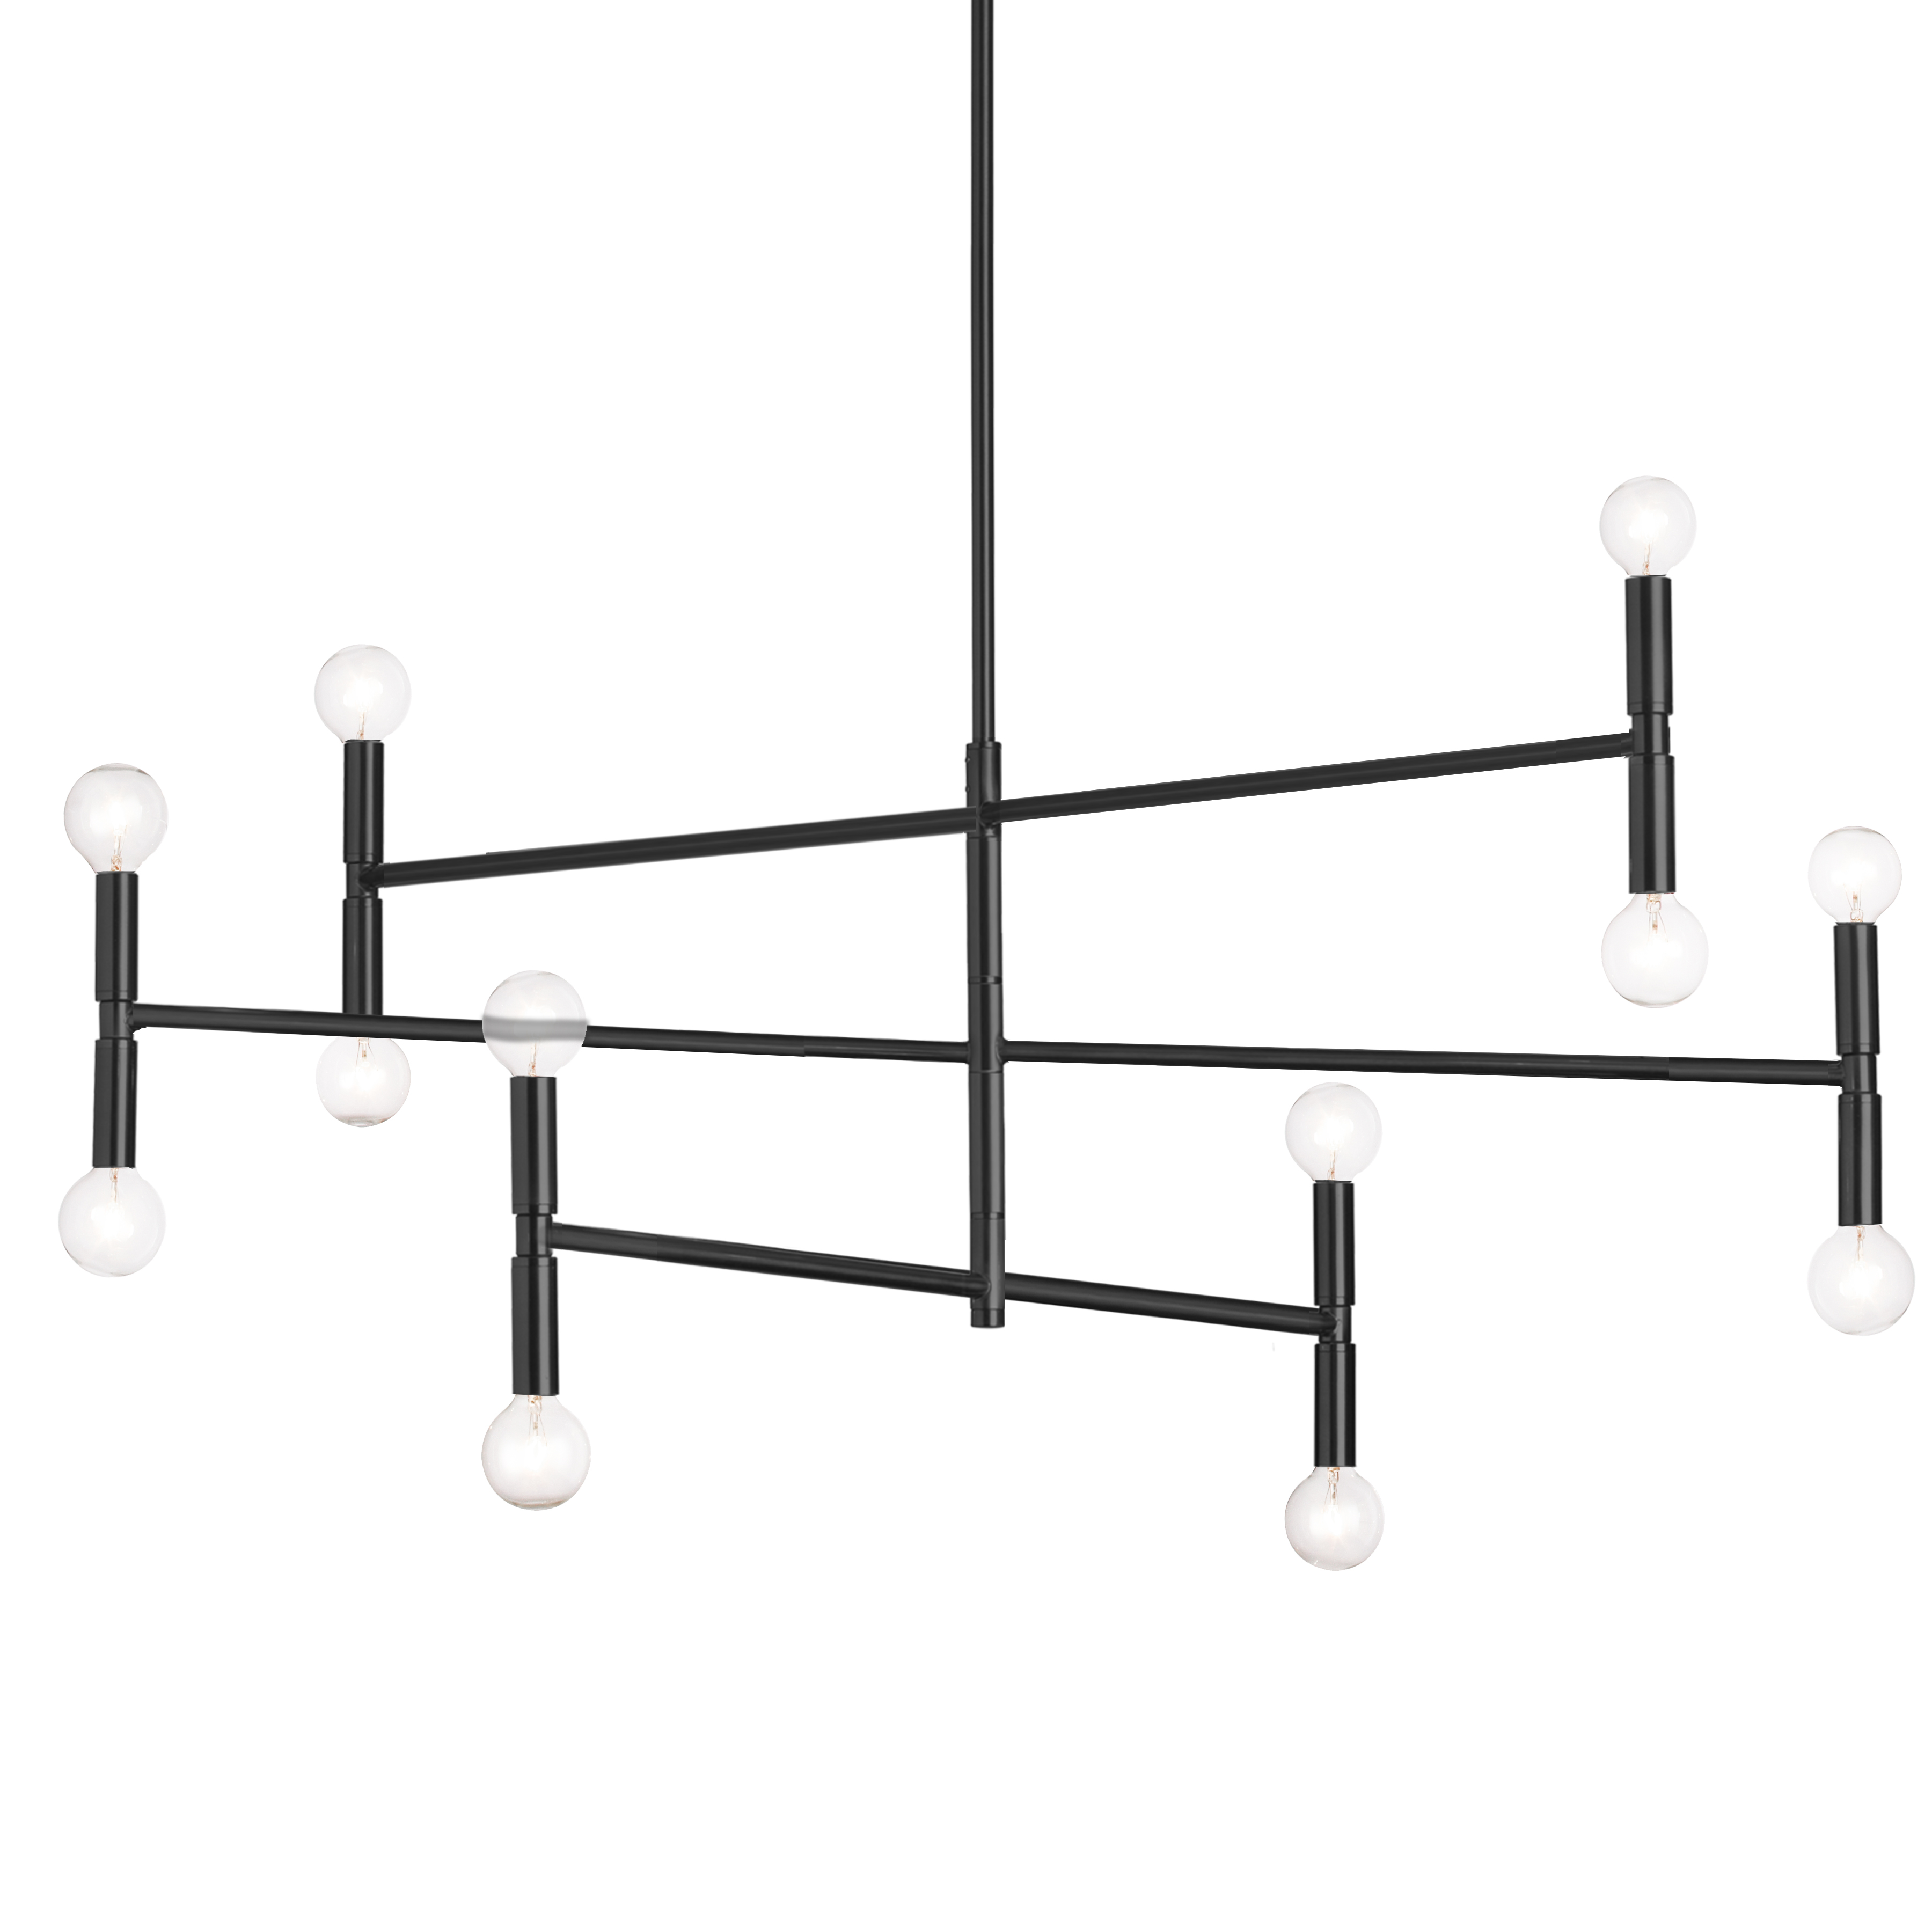 Ava chandelier lights pop out of a contemporary design scheme with an artistic appeal. They can become the focal point of any room, from the living or dining room to a master bedroom. The unique beauty of this family of lighting is based on an asymmetrical linear pattern created by a metal base and arms in your choice of elegant finish. Smaller round lights at both ends of each arm complete a refined and sophisticated look. Ava lighting is an easy way to enliven any simple room design, and add both textural and linear appeal.